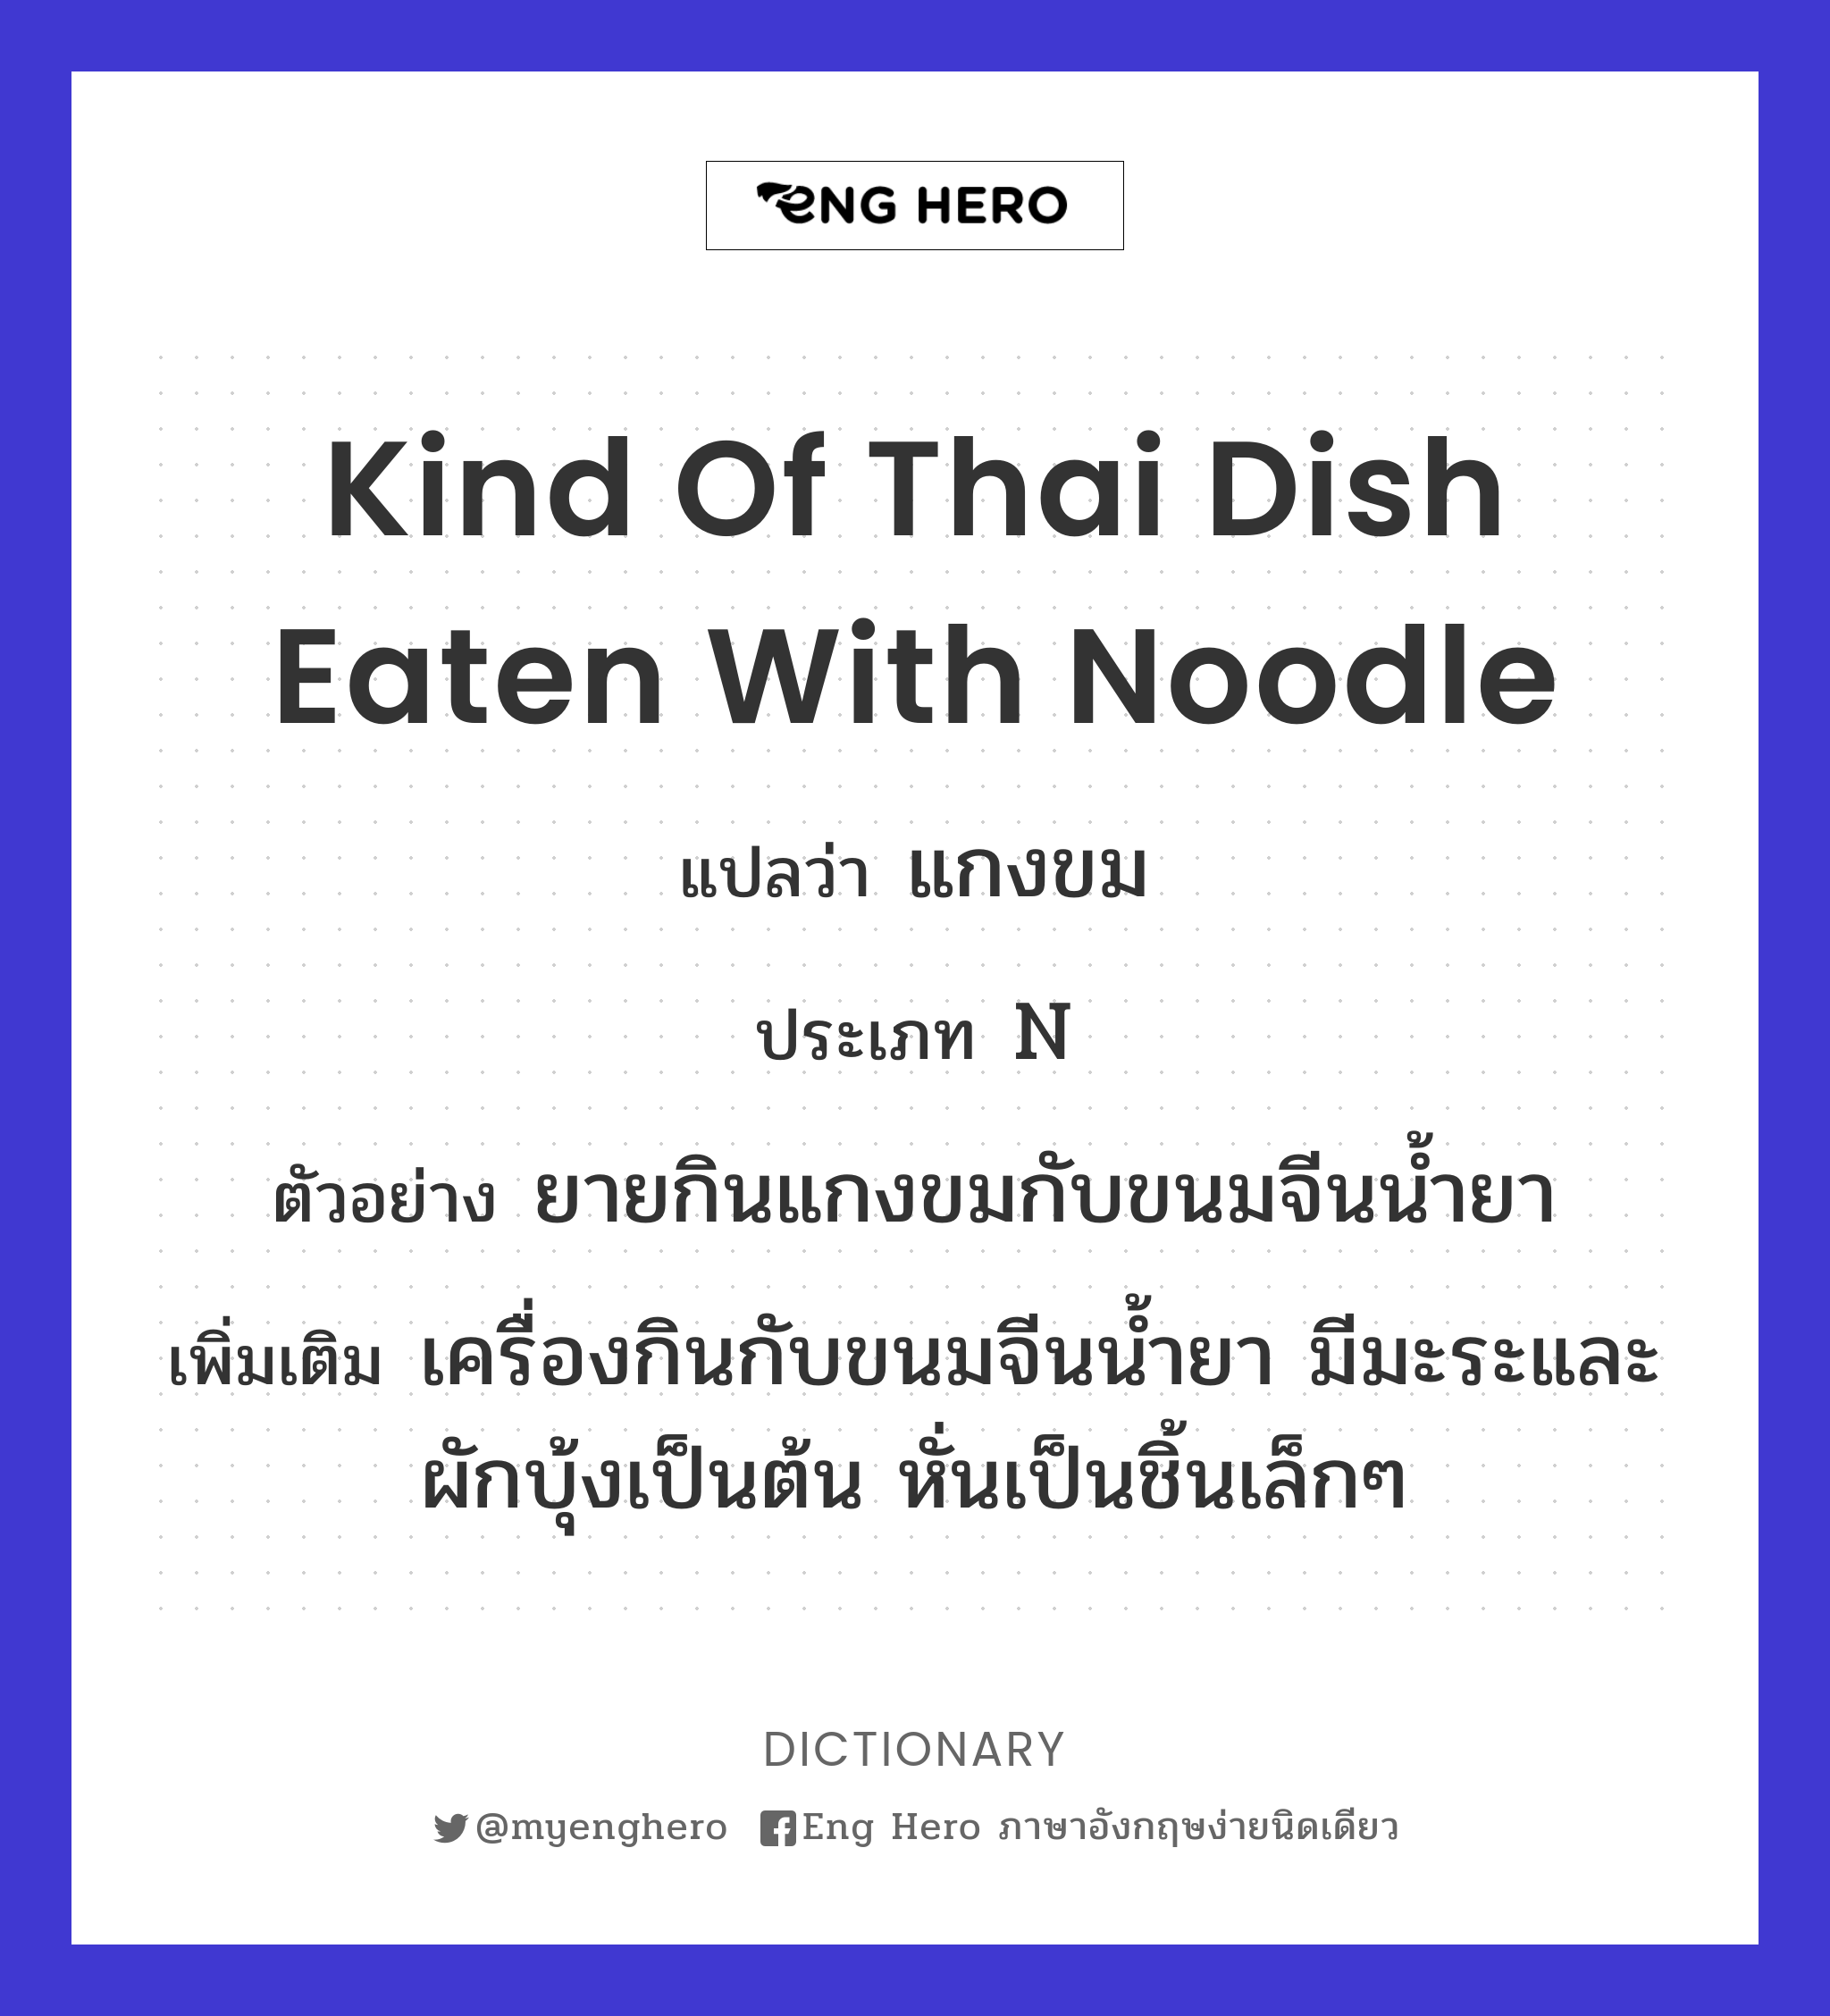 kind of Thai dish eaten with noodle